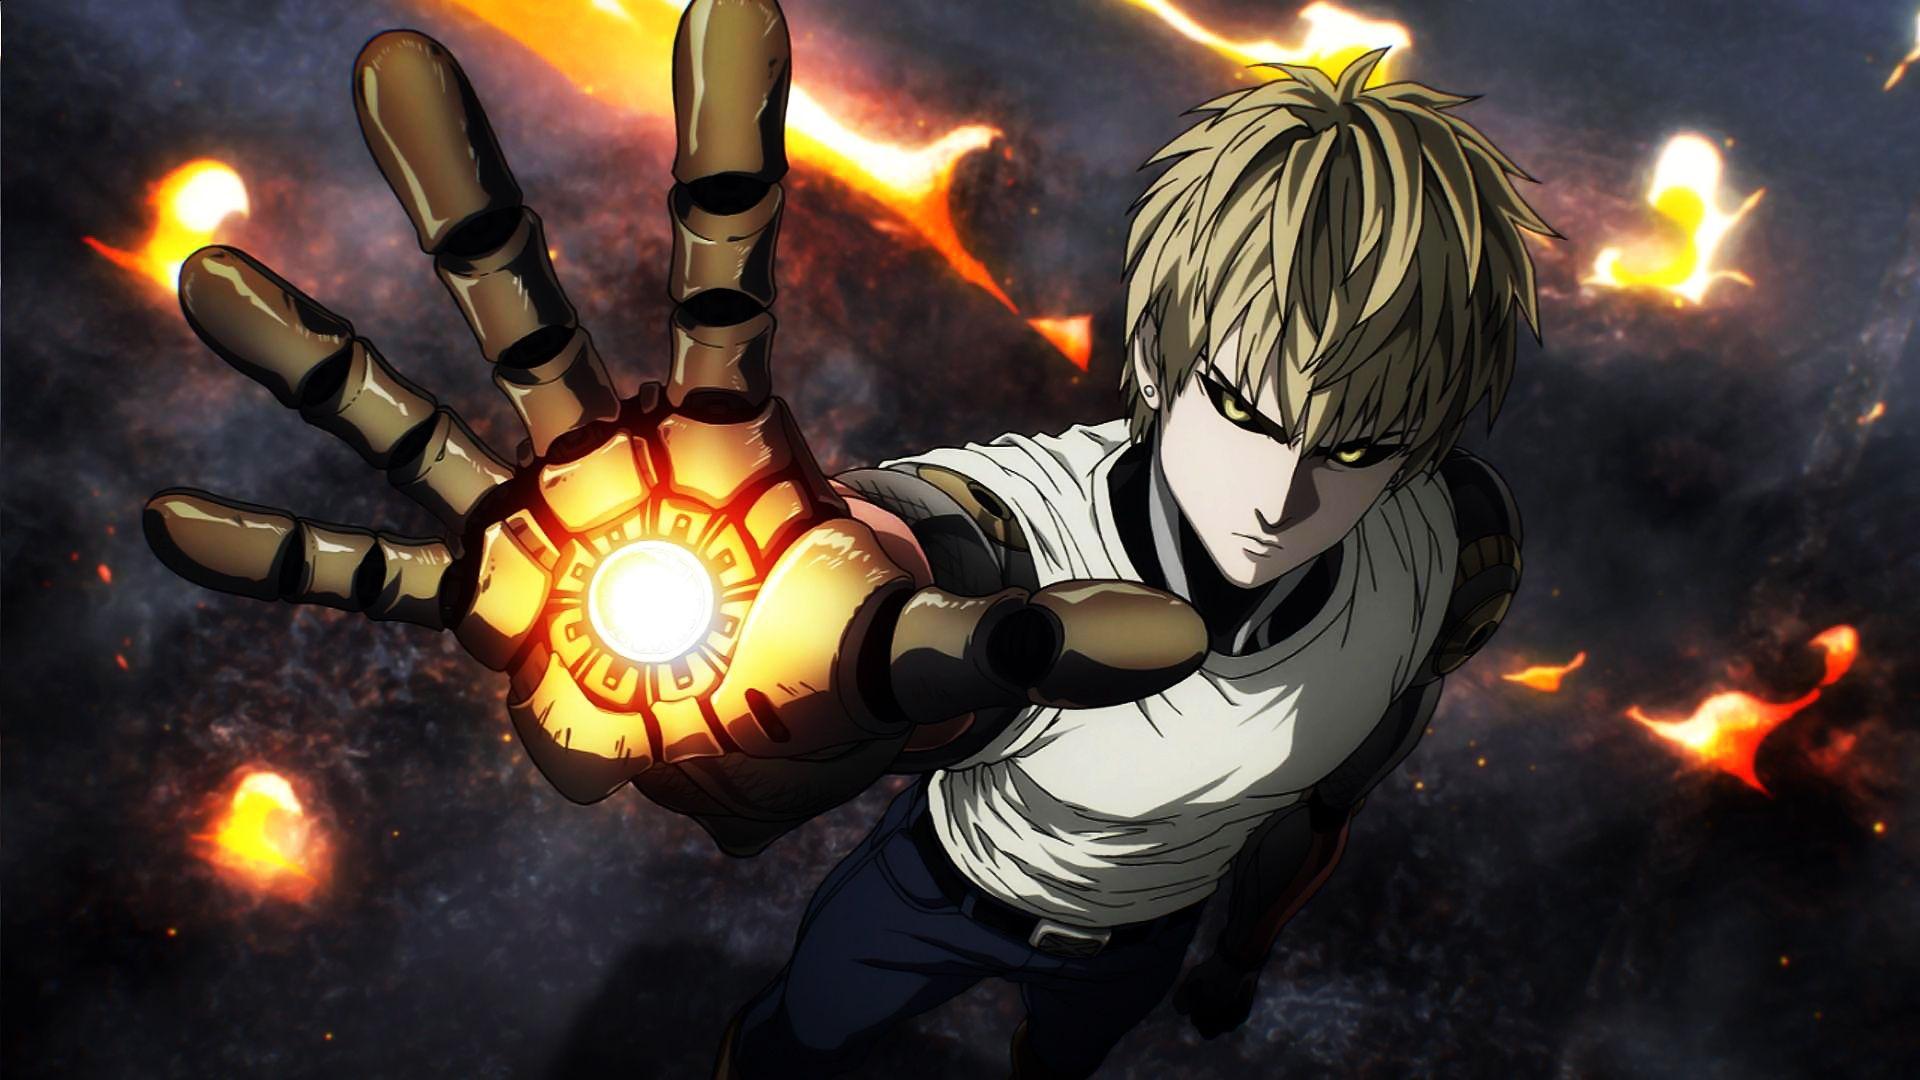 Anime One Punch Man Genos Wallpaper. Androids, Cyborgs, ExoSuits